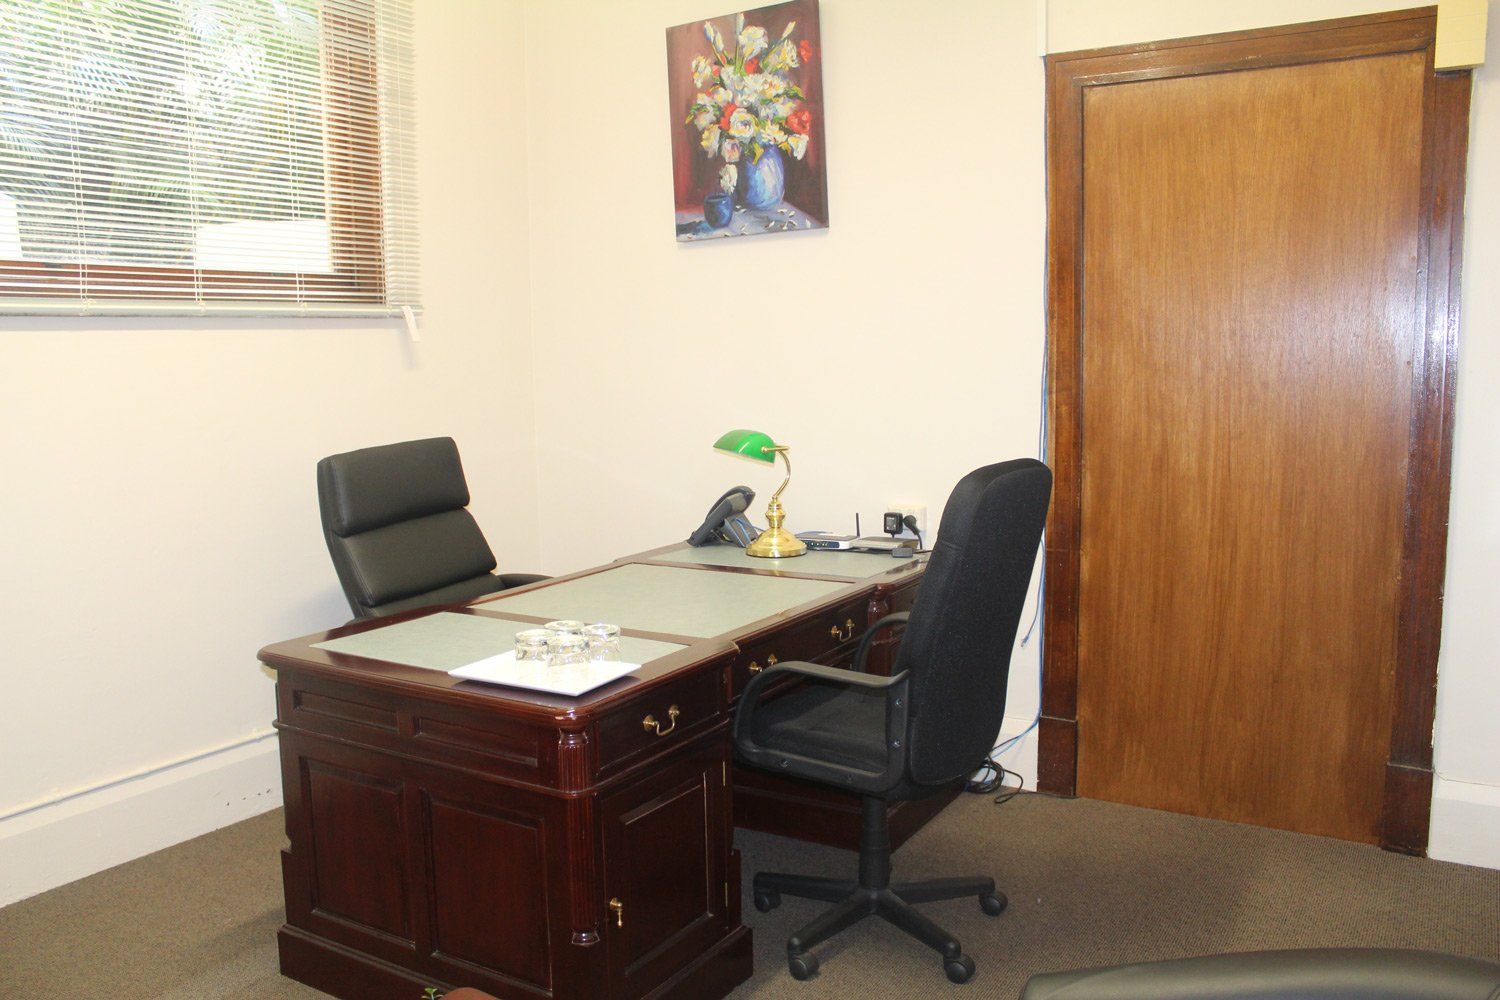 Room with desk